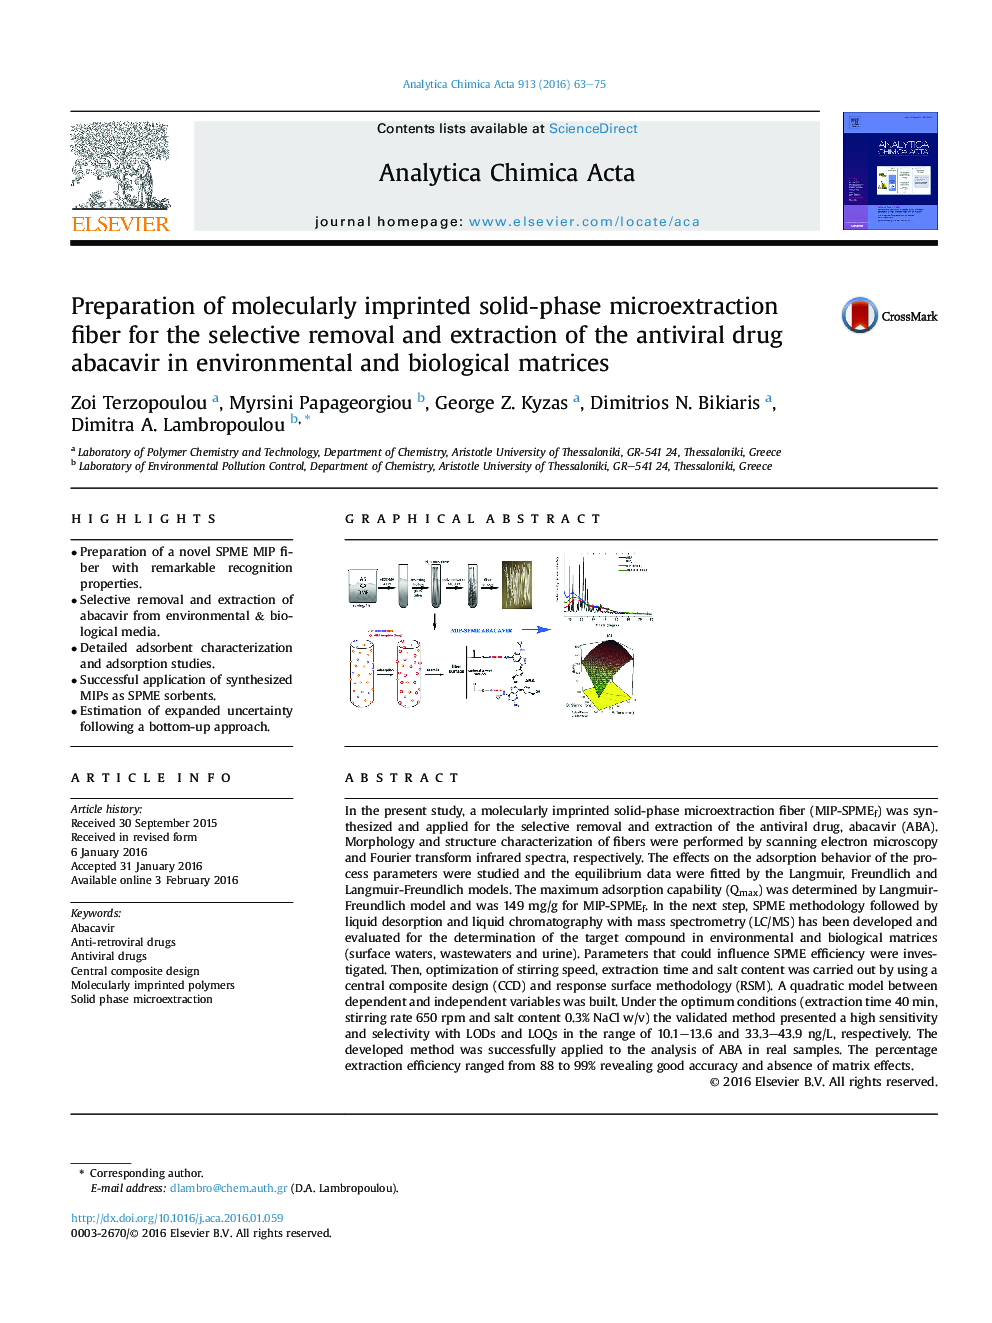 Preparation of molecularly imprinted solid-phase microextraction fiber for the selective removal and extraction of the antiviral drug abacavir in environmental and biological matrices